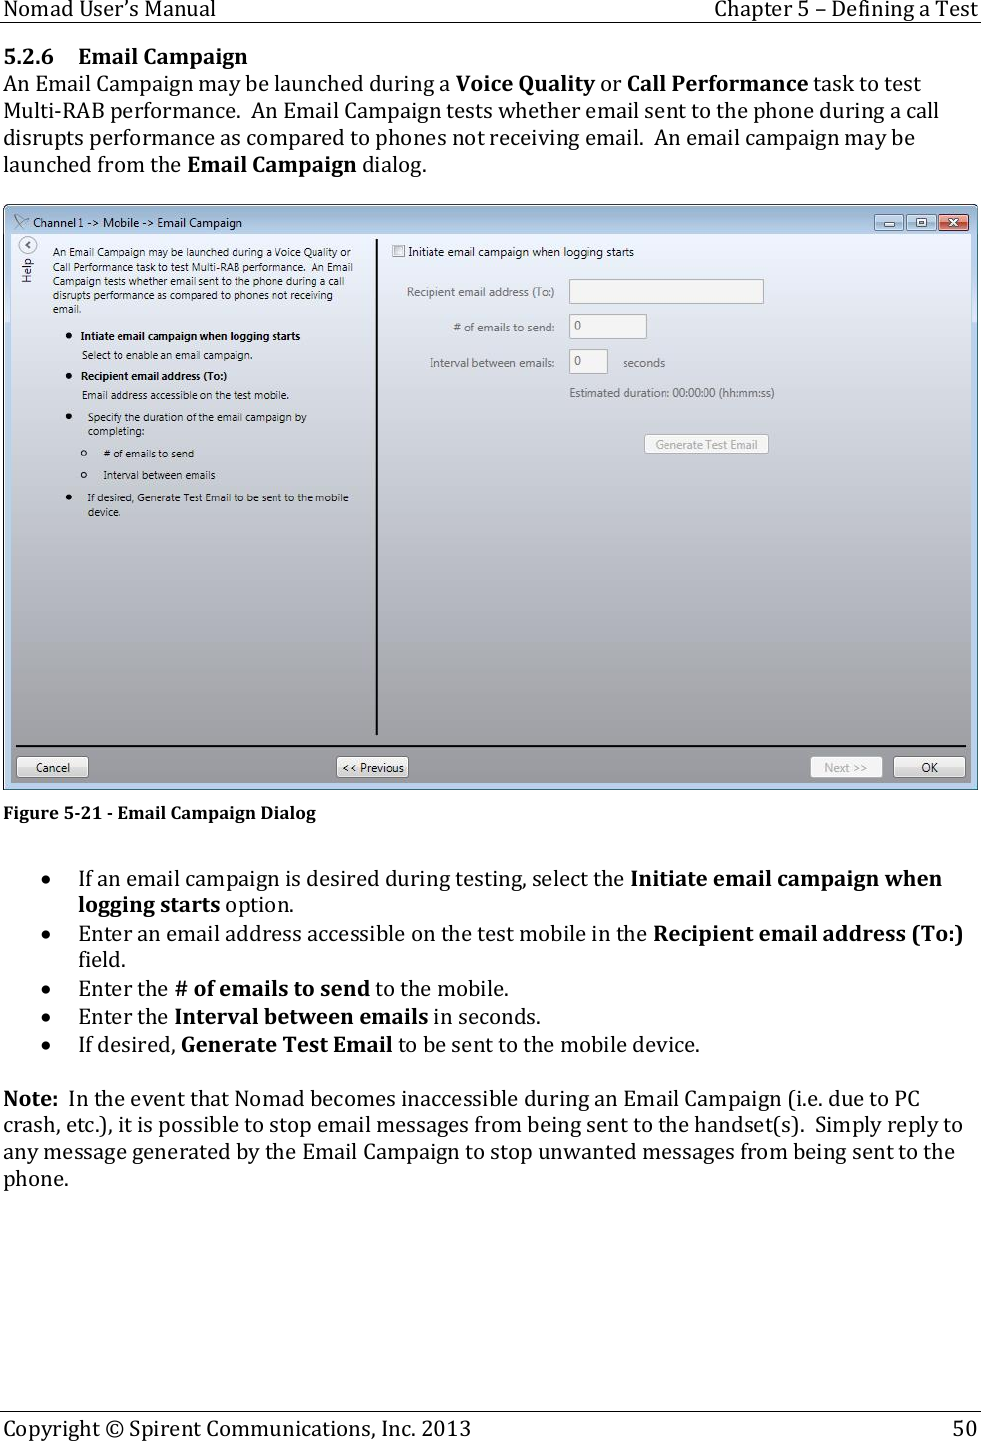  Nomad User’s Manual  Chapter 5 – Defining a Test Copyright © Spirent Communications, Inc. 2013    50  5.2.6 Email Campaign An Email Campaign may be launched during a Voice Quality or Call Performance task to test Multi-RAB performance.  An Email Campaign tests whether email sent to the phone during a call disrupts performance as compared to phones not receiving email.  An email campaign may be launched from the Email Campaign dialog.   Figure 5-21 - Email Campaign Dialog   If an email campaign is desired during testing, select the Initiate email campaign when logging starts option.  Enter an email address accessible on the test mobile in the Recipient email address (To:) field.  Enter the # of emails to send to the mobile.  Enter the Interval between emails in seconds.  If desired, Generate Test Email to be sent to the mobile device.  Note:  In the event that Nomad becomes inaccessible during an Email Campaign (i.e. due to PC crash, etc.), it is possible to stop email messages from being sent to the handset(s).  Simply reply to any message generated by the Email Campaign to stop unwanted messages from being sent to the phone.   